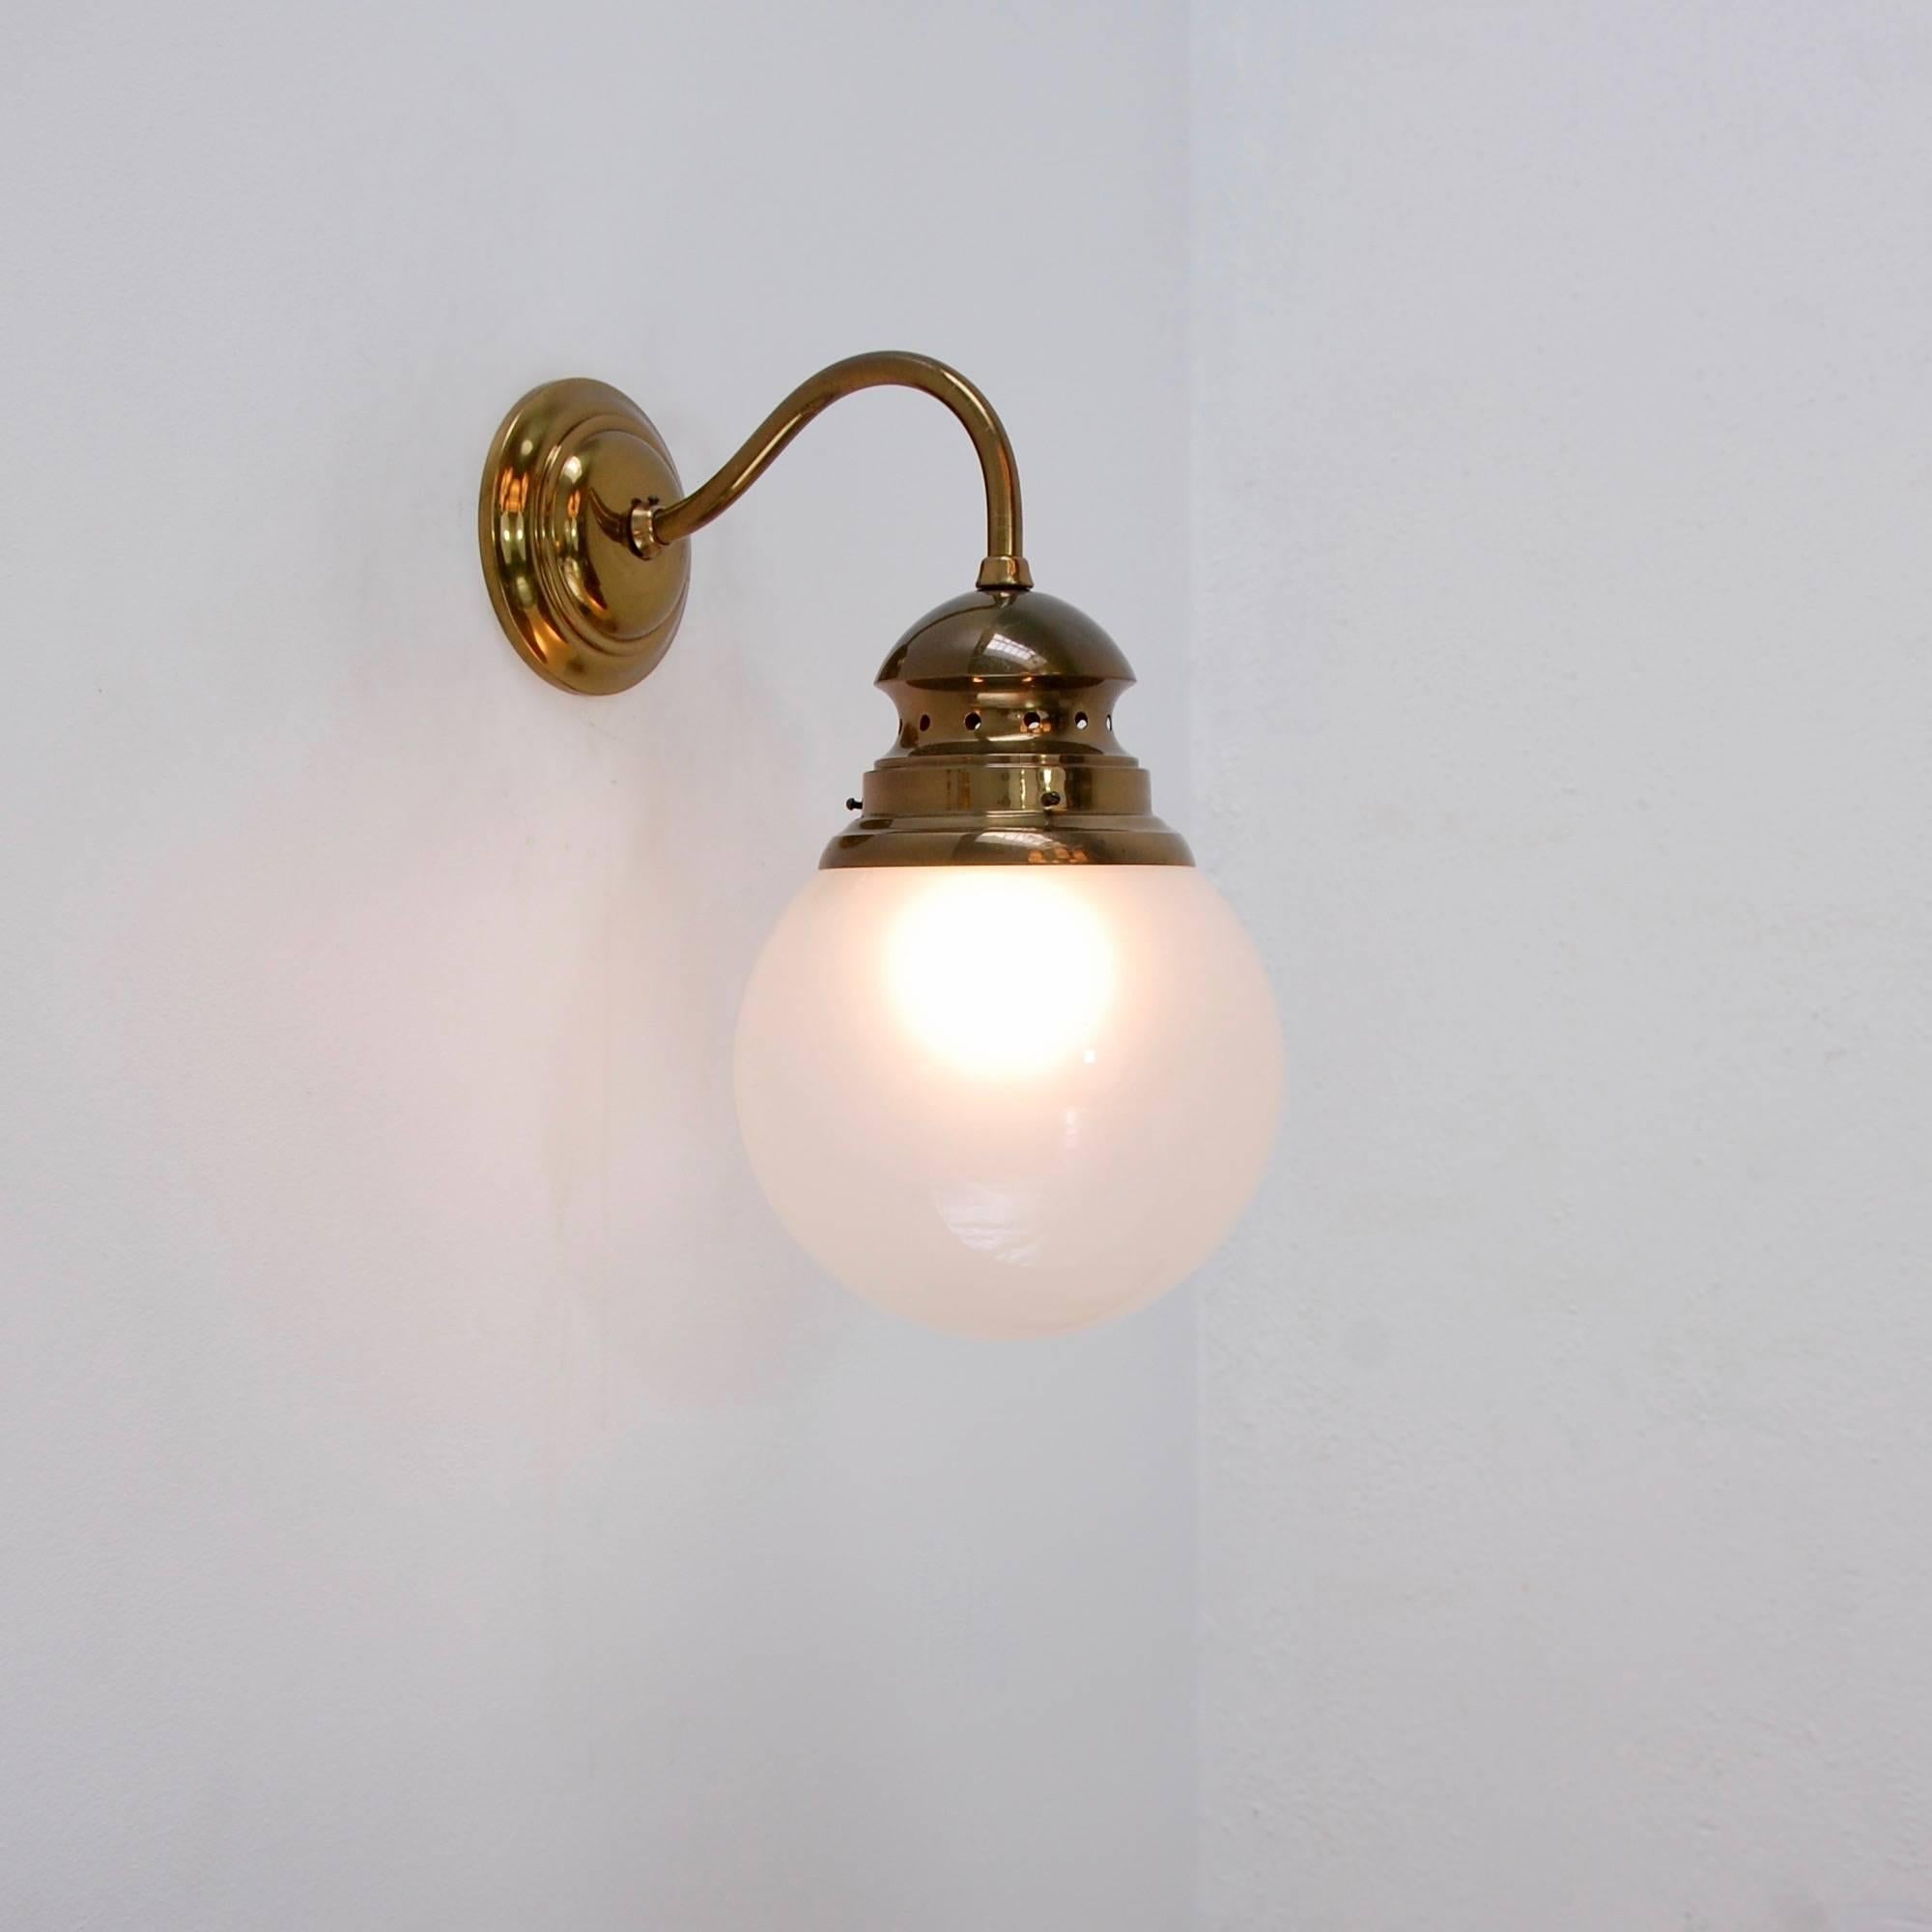 2 Italian wall lights designed by Luigi Caccia Dominioni for Azucena in naturally aged brass, and glass globe frosted inside. Single medium E26 based socket per sconce. Priced individually. 

We are aware that they are commonly used in a reversed